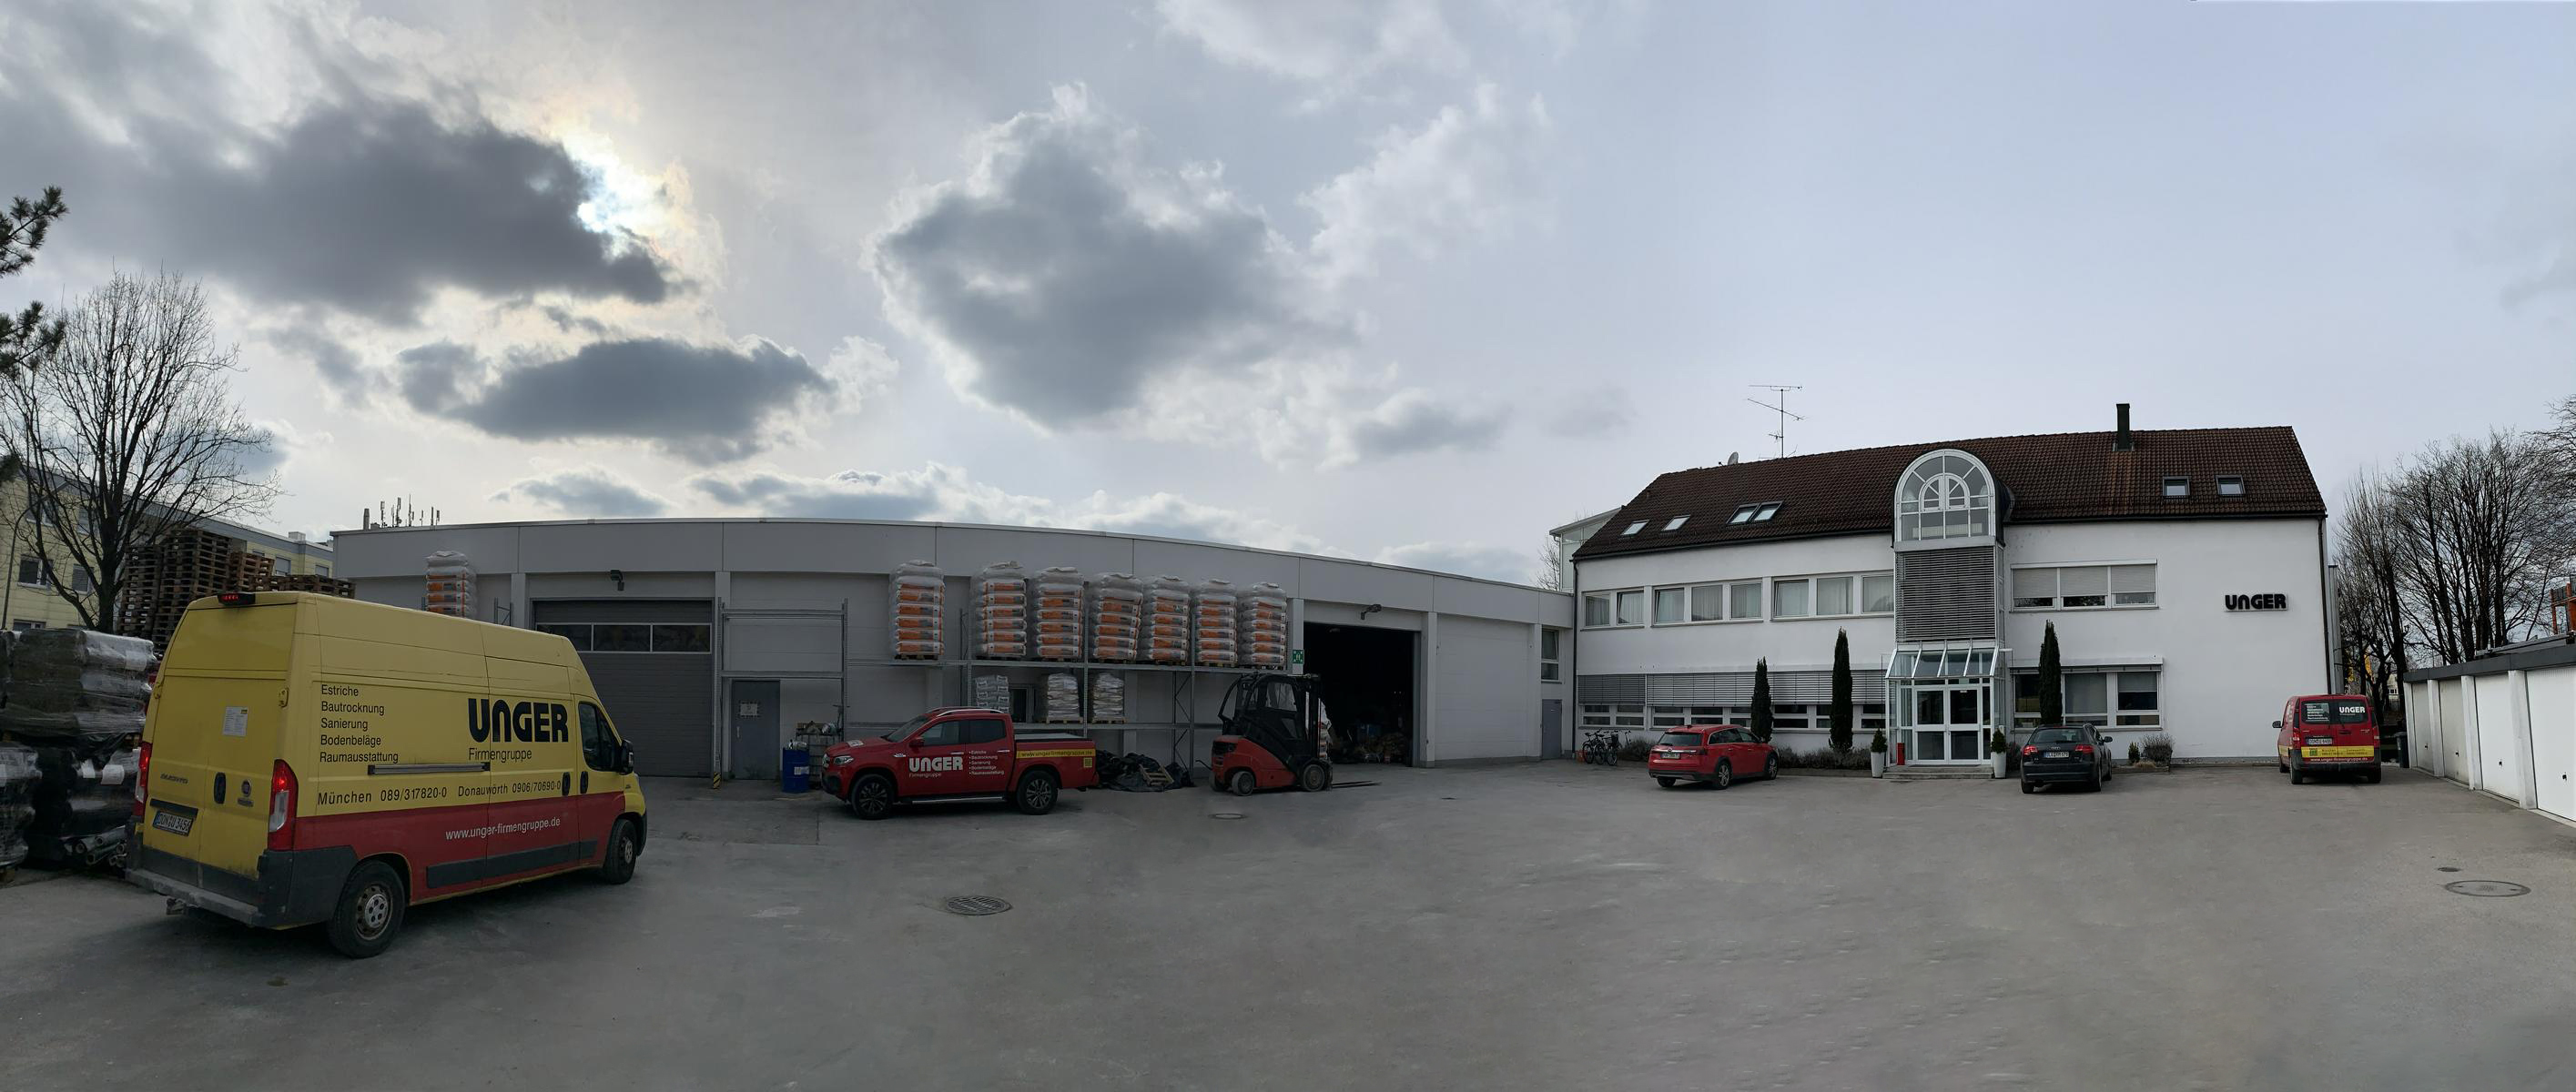 Unger-Thermo-Boden-GmbH